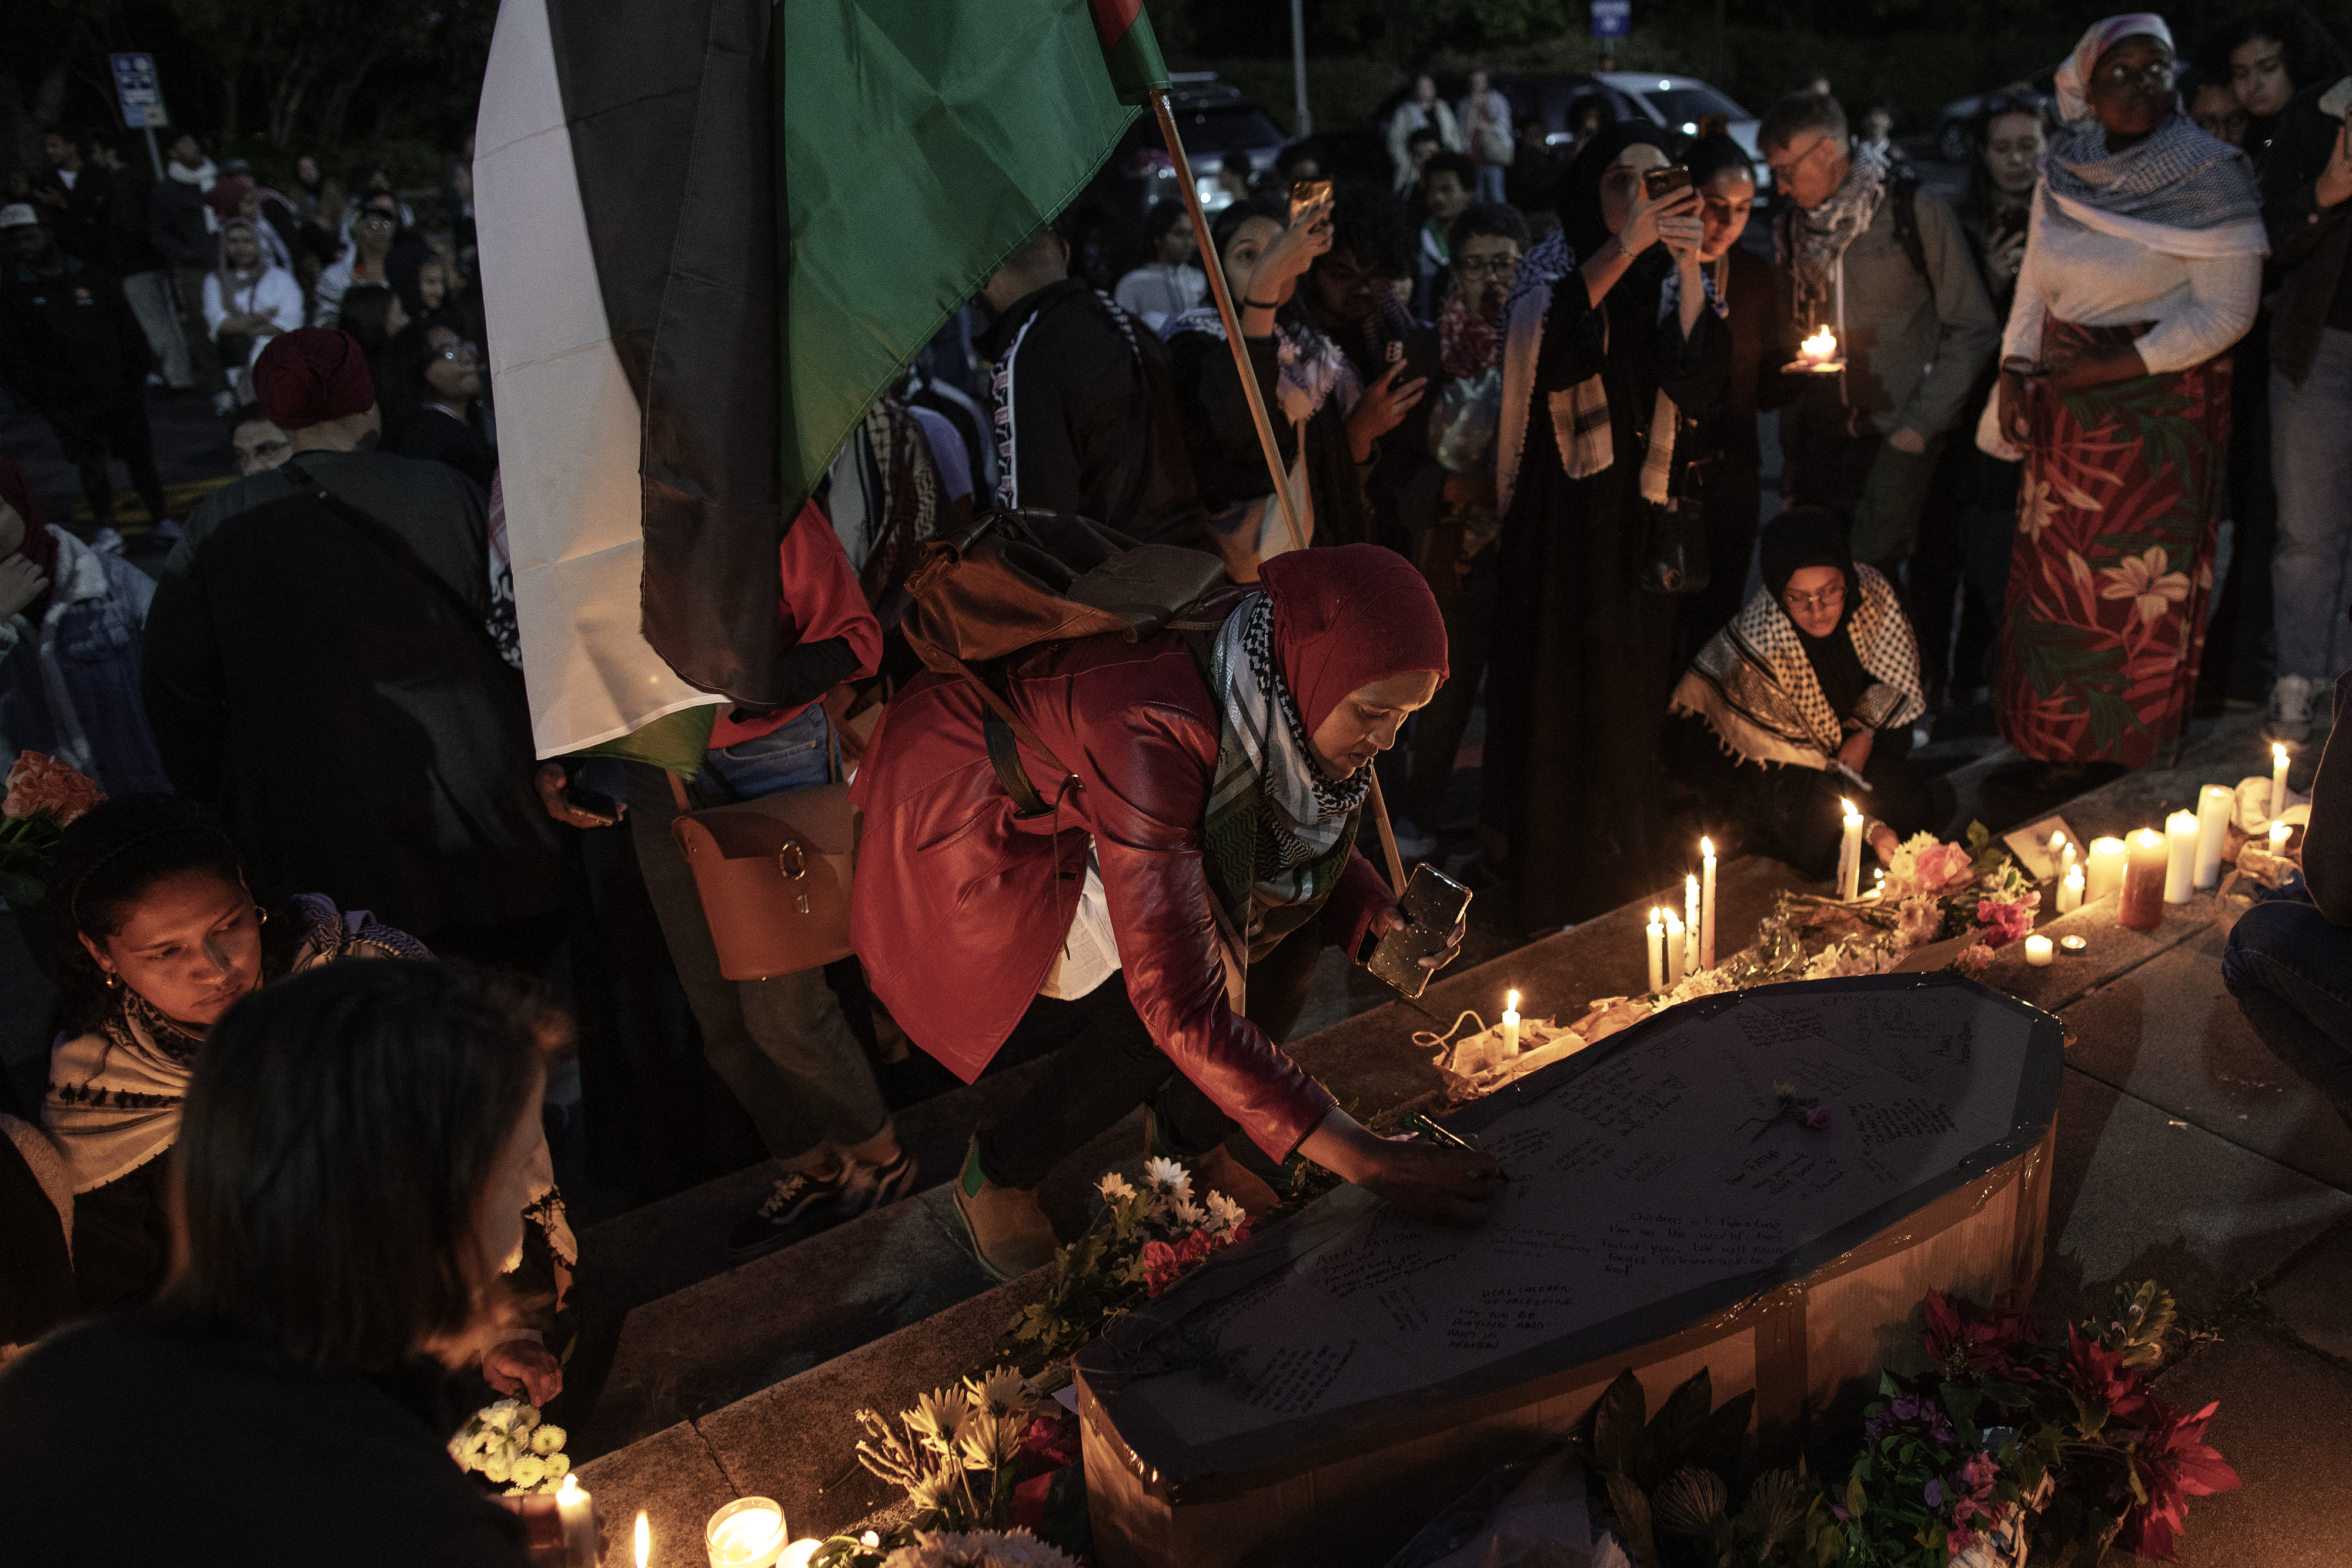 Activists light candles and lay flowers as they write messages on a mock coffin during a vigil event "Honour of All the Palestinian Martyrs" organised by a group of Jewish, Muslim and Christian students at the University of Cape Town lower Campus in Cape Town.